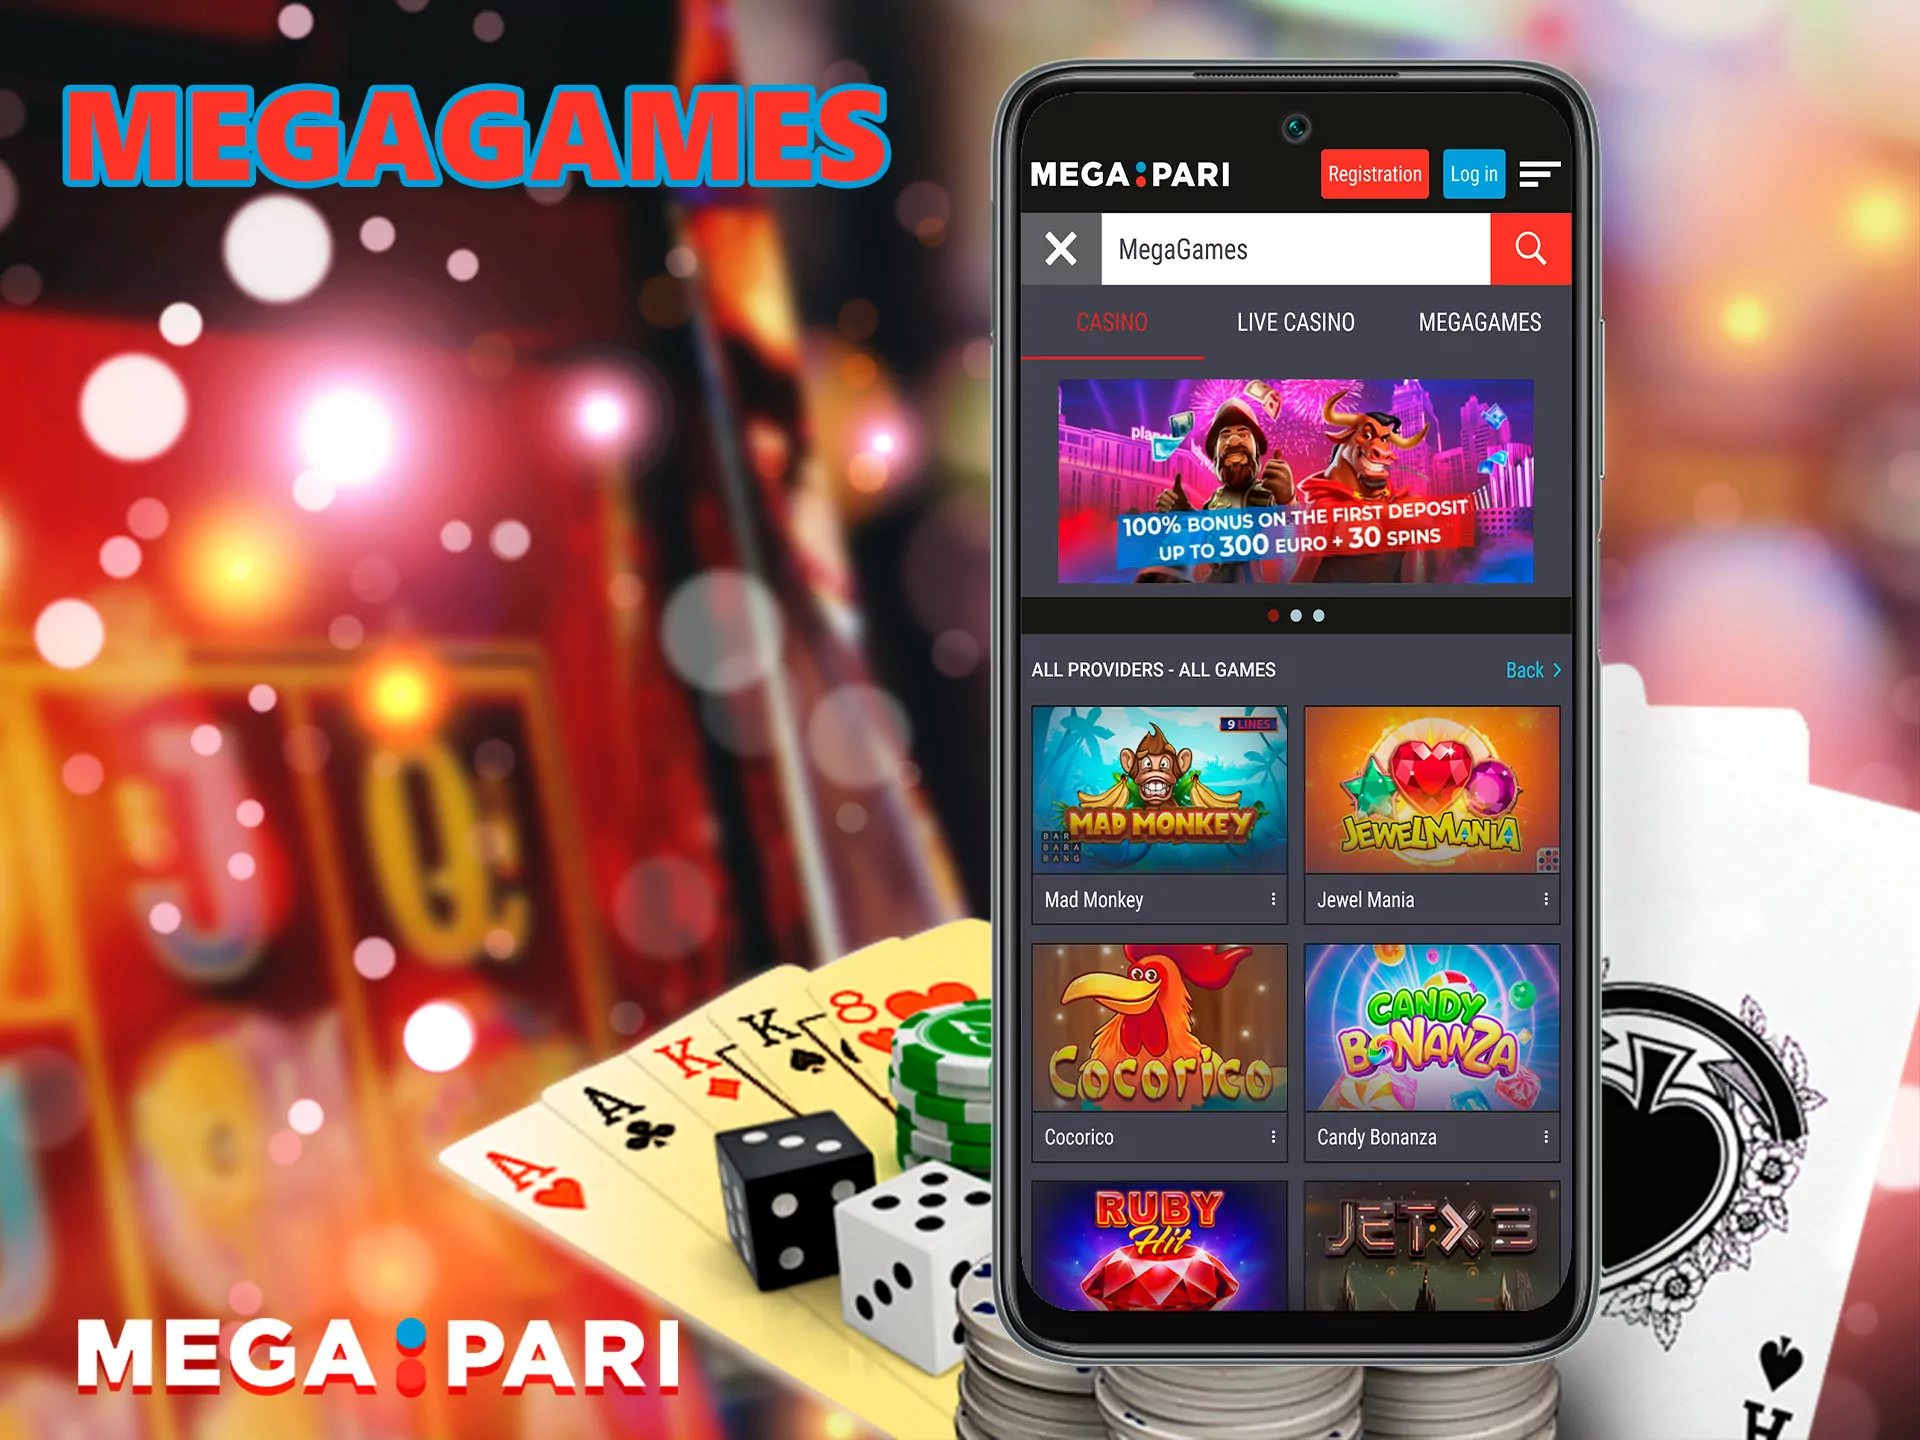 A giant collection of games, here you will find a lot of entertainment both from the casino itself and from the provider, card games, slots, lotteries, craps and other games - all this is available on the site and in the application.